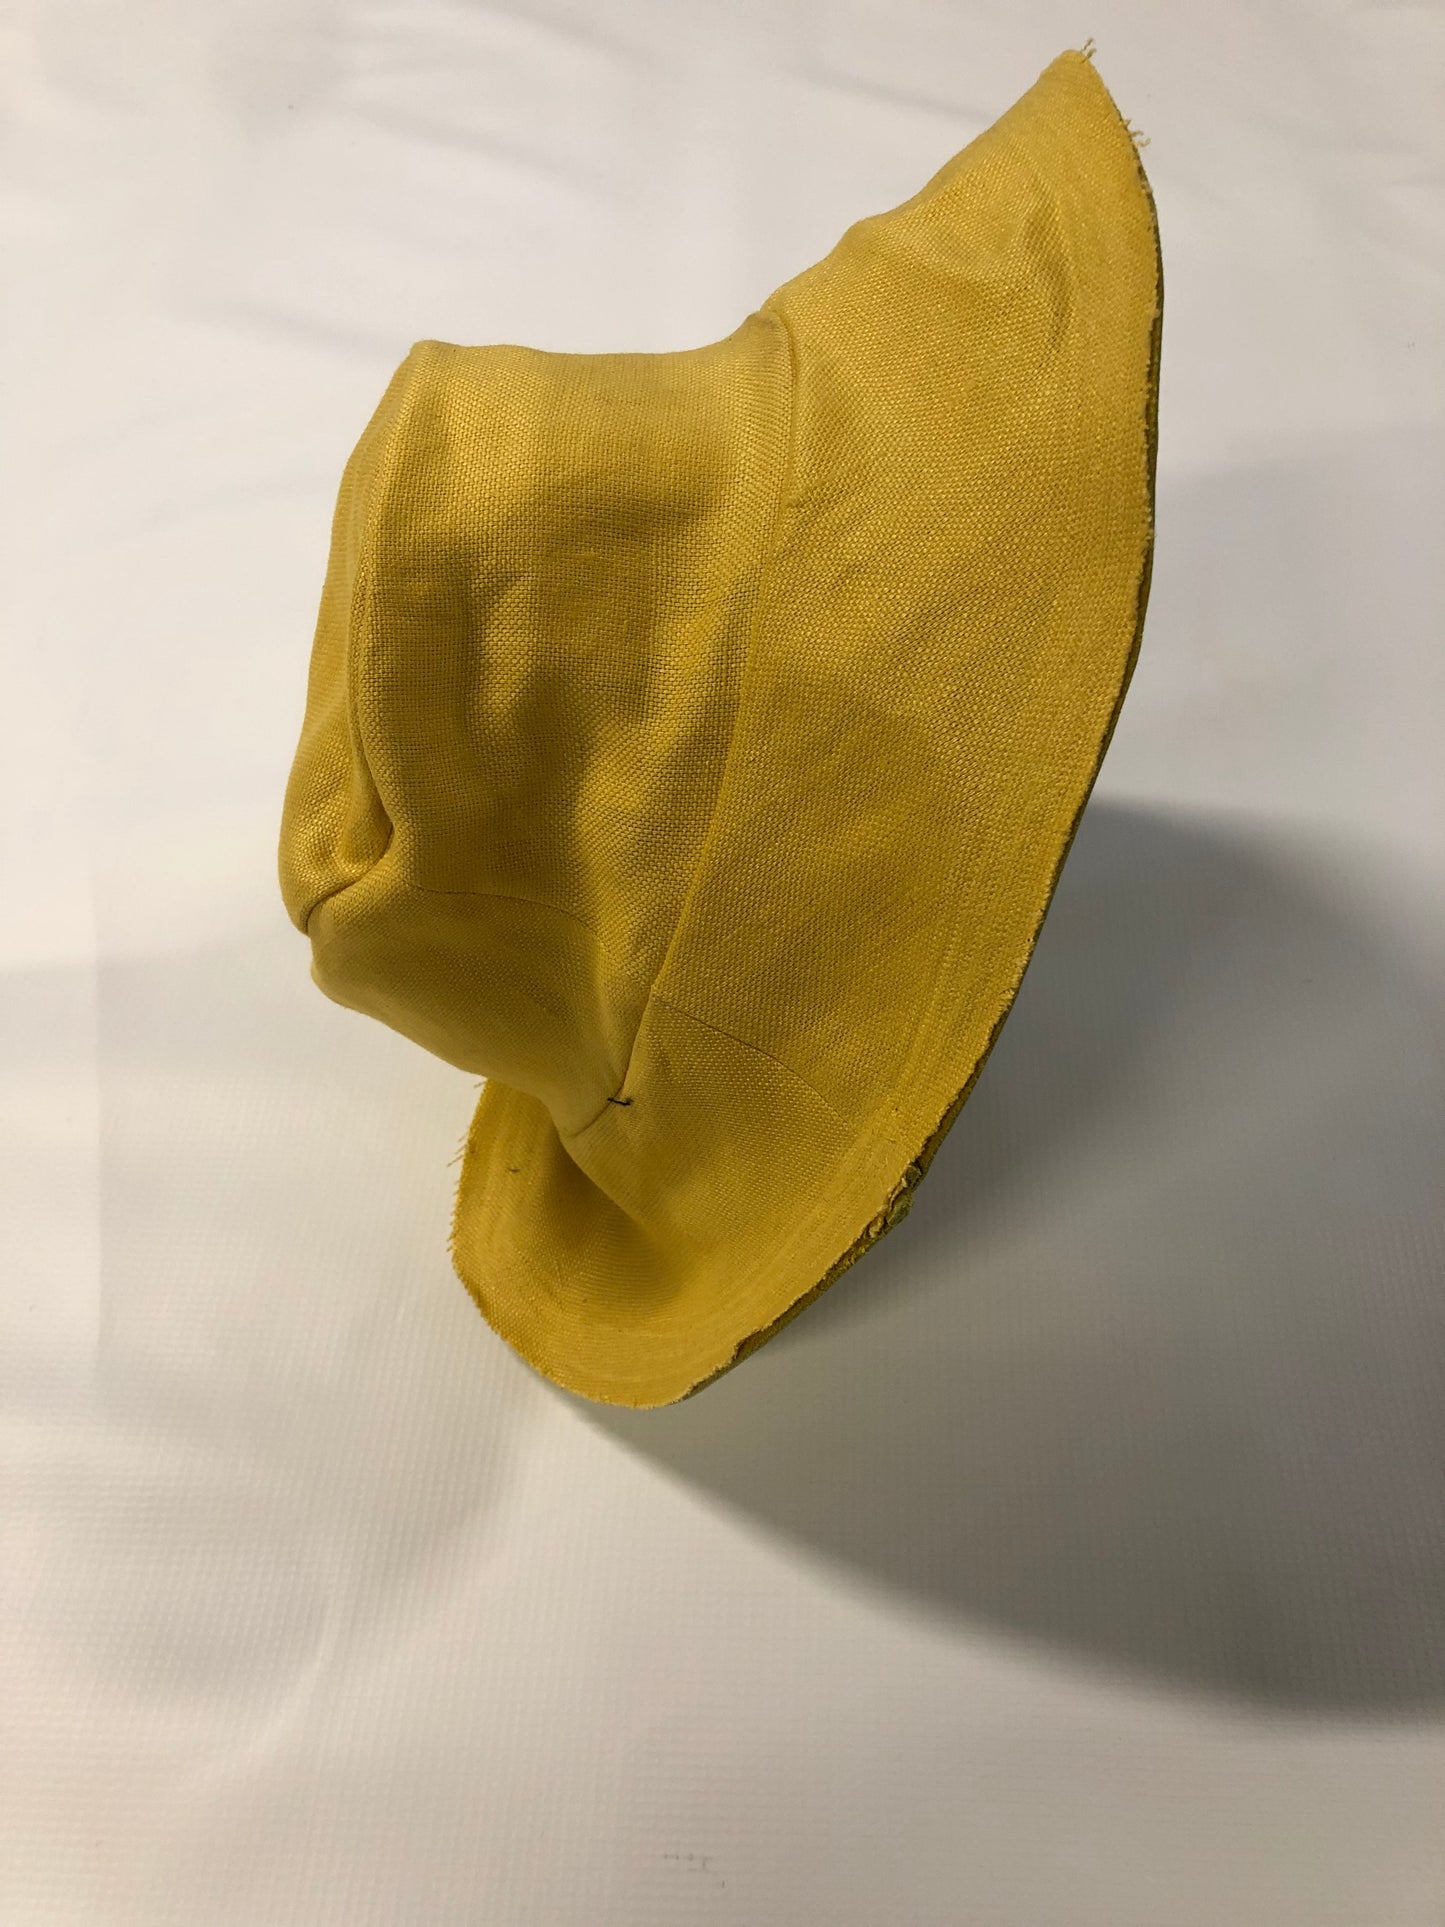 KNG13 || EXTENDED BRIM BUCKET HAT  ||  100% COWHIDE -YELLOW